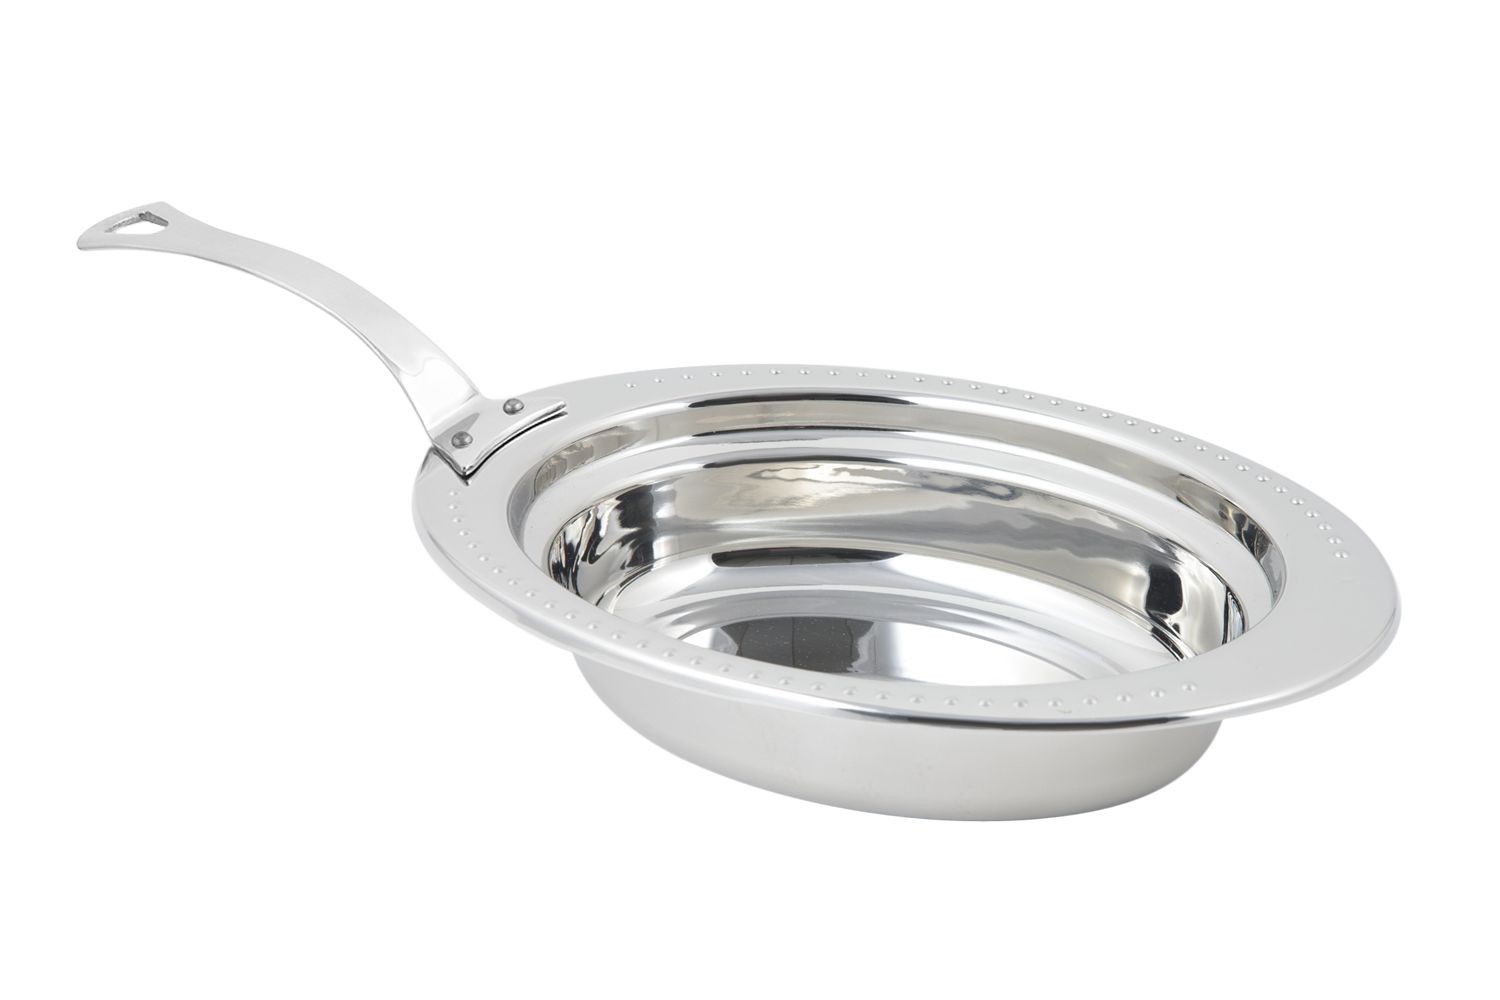 Bon Chef 5304HLSS Bolero Design Oval Food Pan with Long Stainless Steel Handle, 2 Qt.